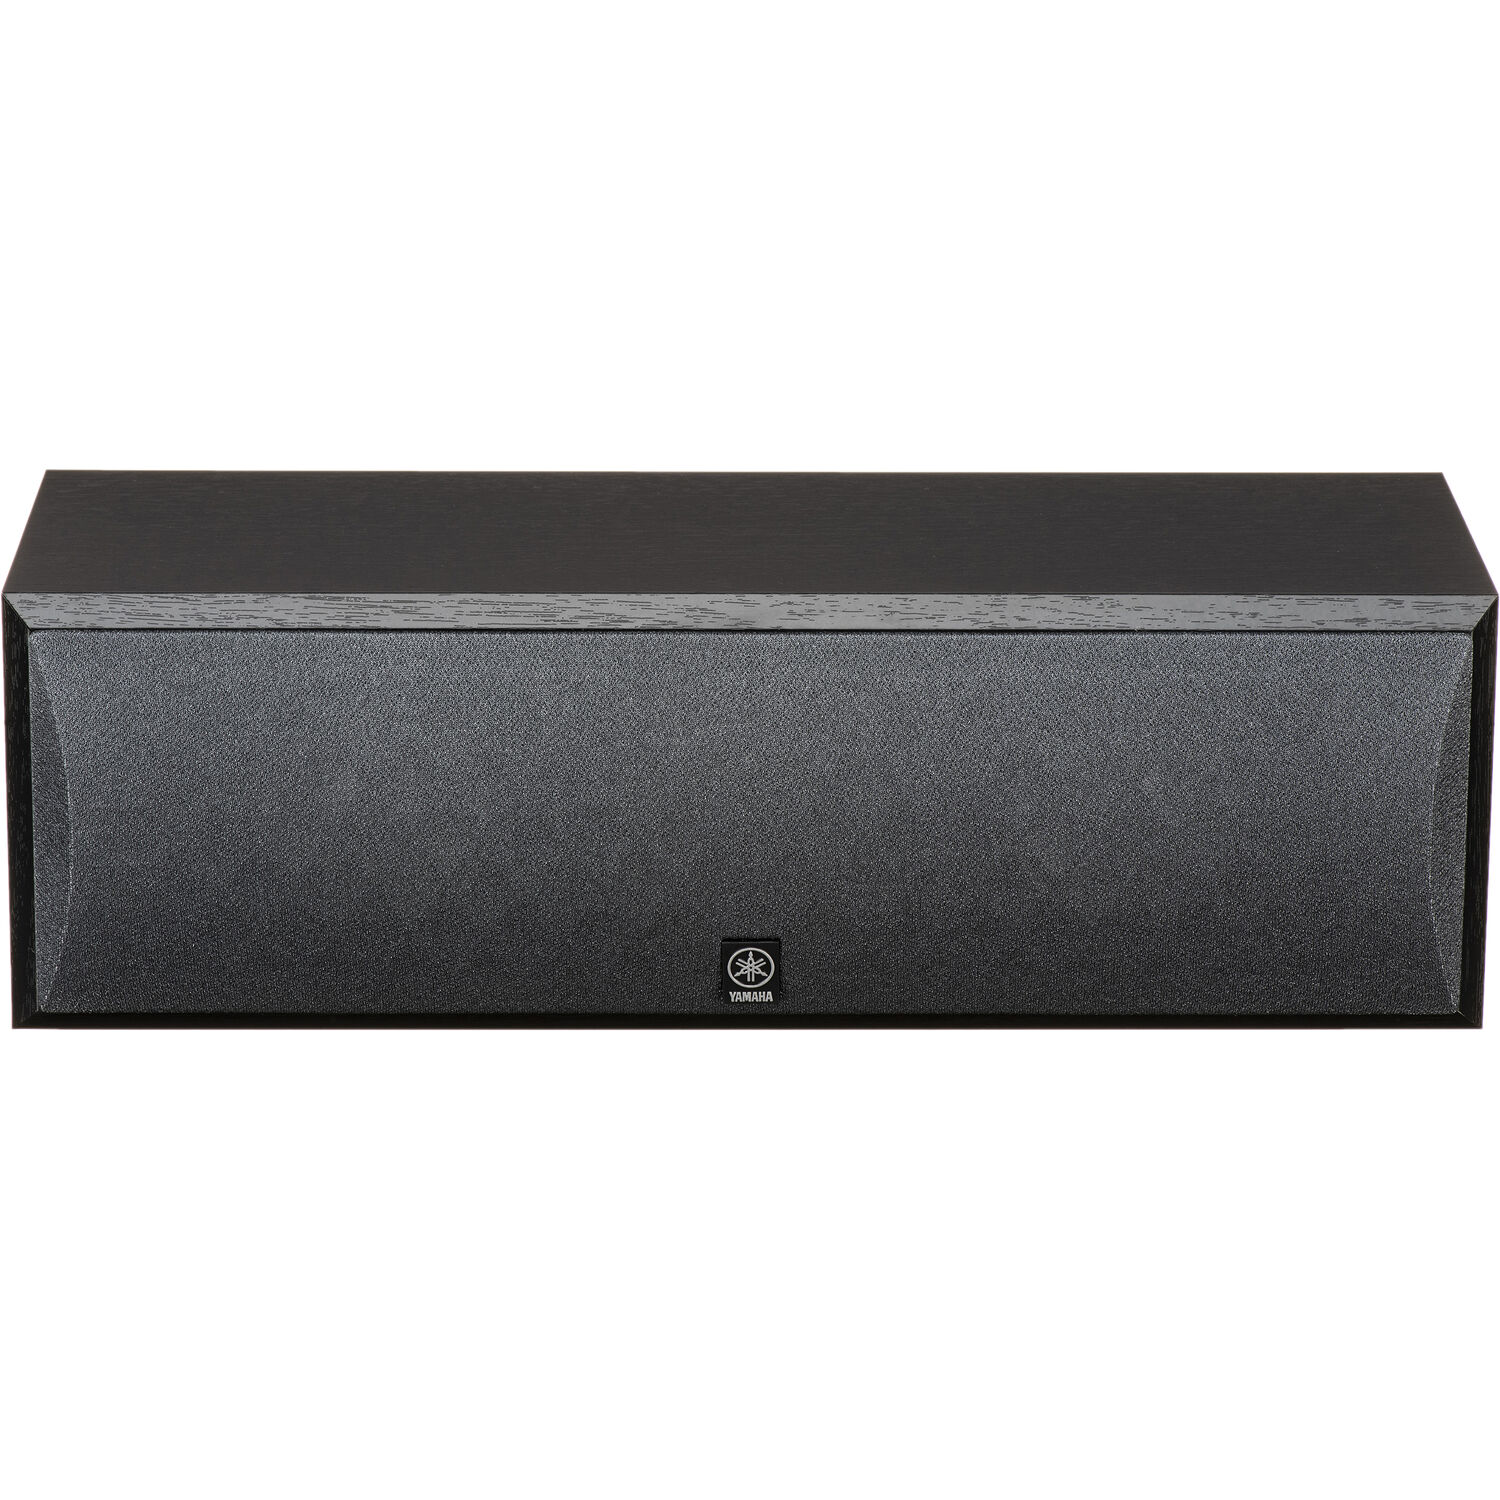 Yamaha NS-C210 Two-Way Center Channel Speaker (Black) - NS-C210BL